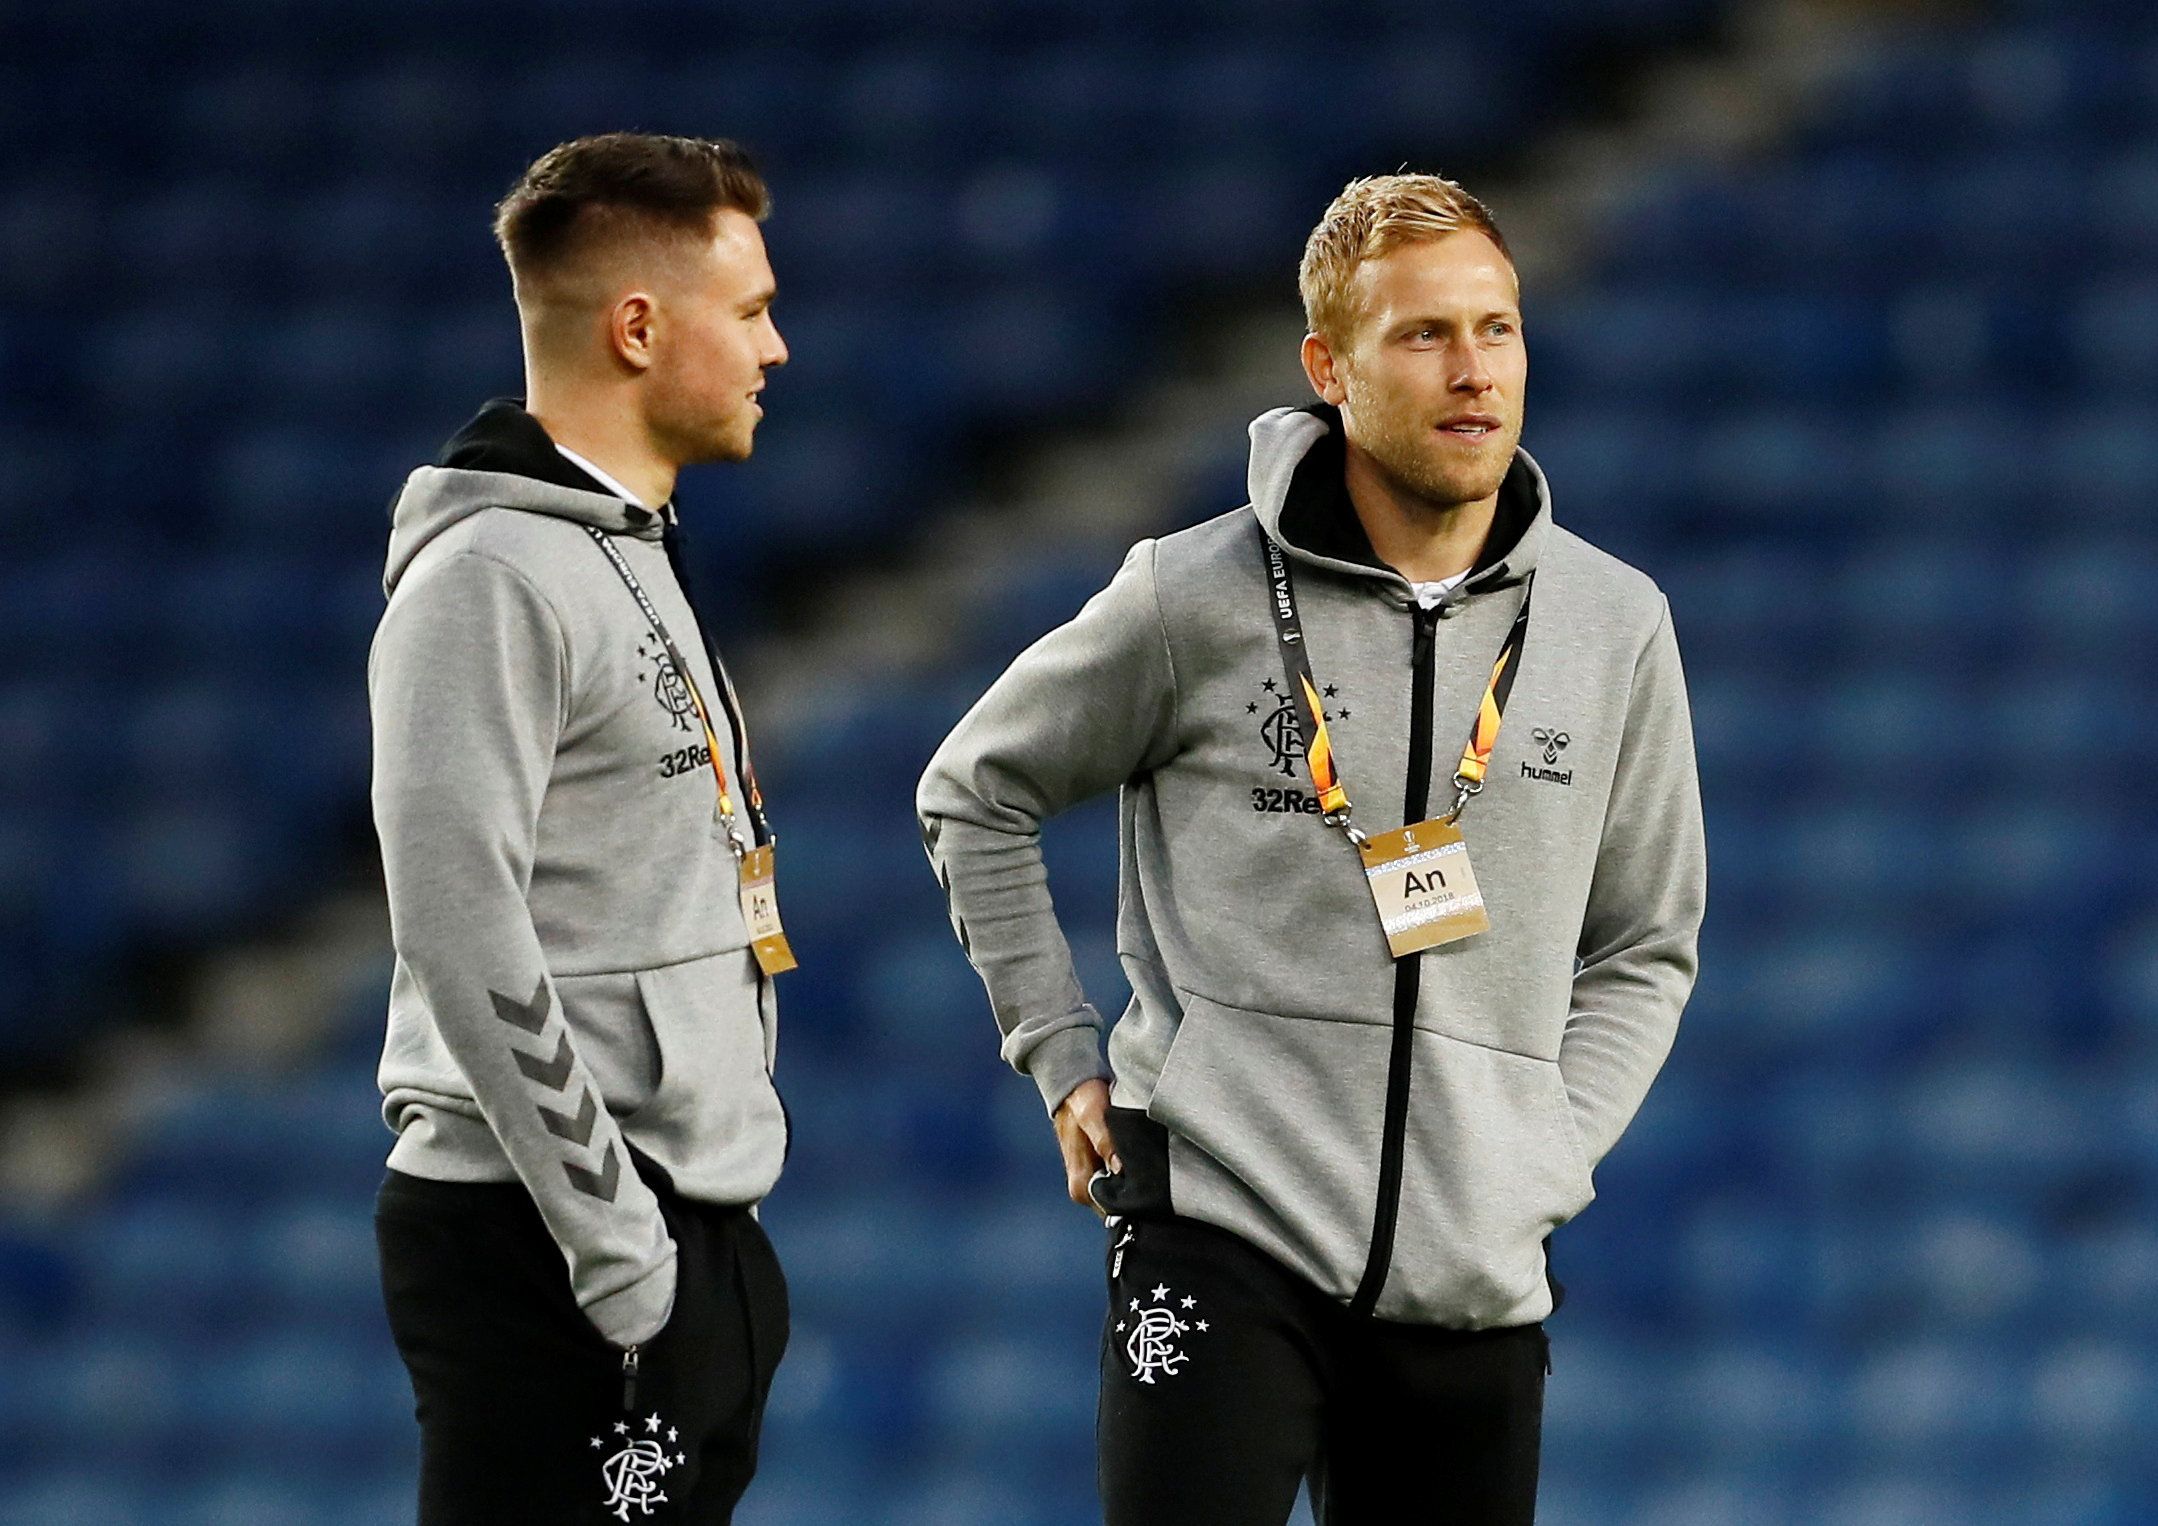 Soccer Football - Europa League - Group Stage - Group G - Rangers v SK Rapid Wien - Ibrox, Glasgow, Britain - October 4, 2018  Rangers' Scott Arfield with Glenn Middleton before the match   Action Images via Reuters/Jason Cairnduff